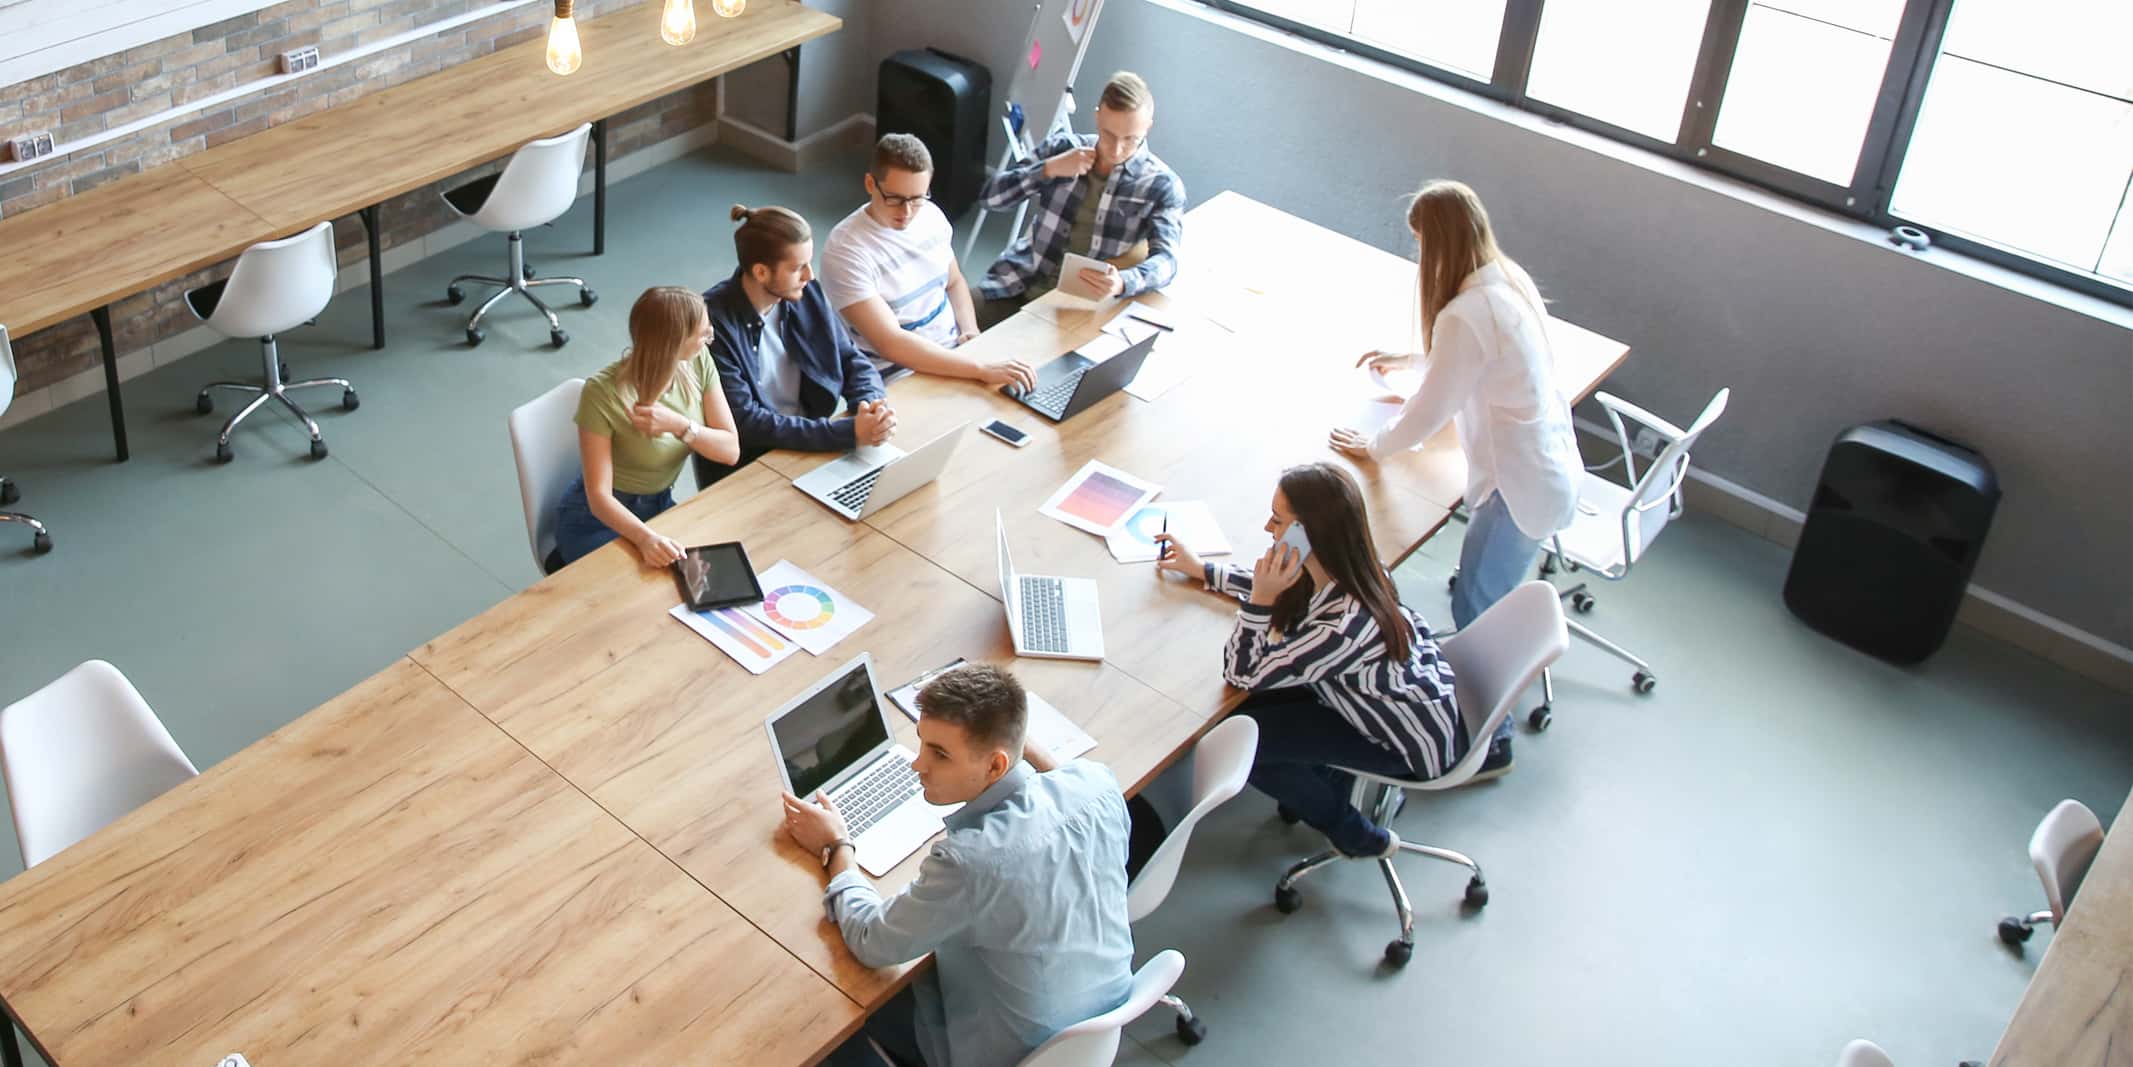 Employees collaborating in a modern workplace environment